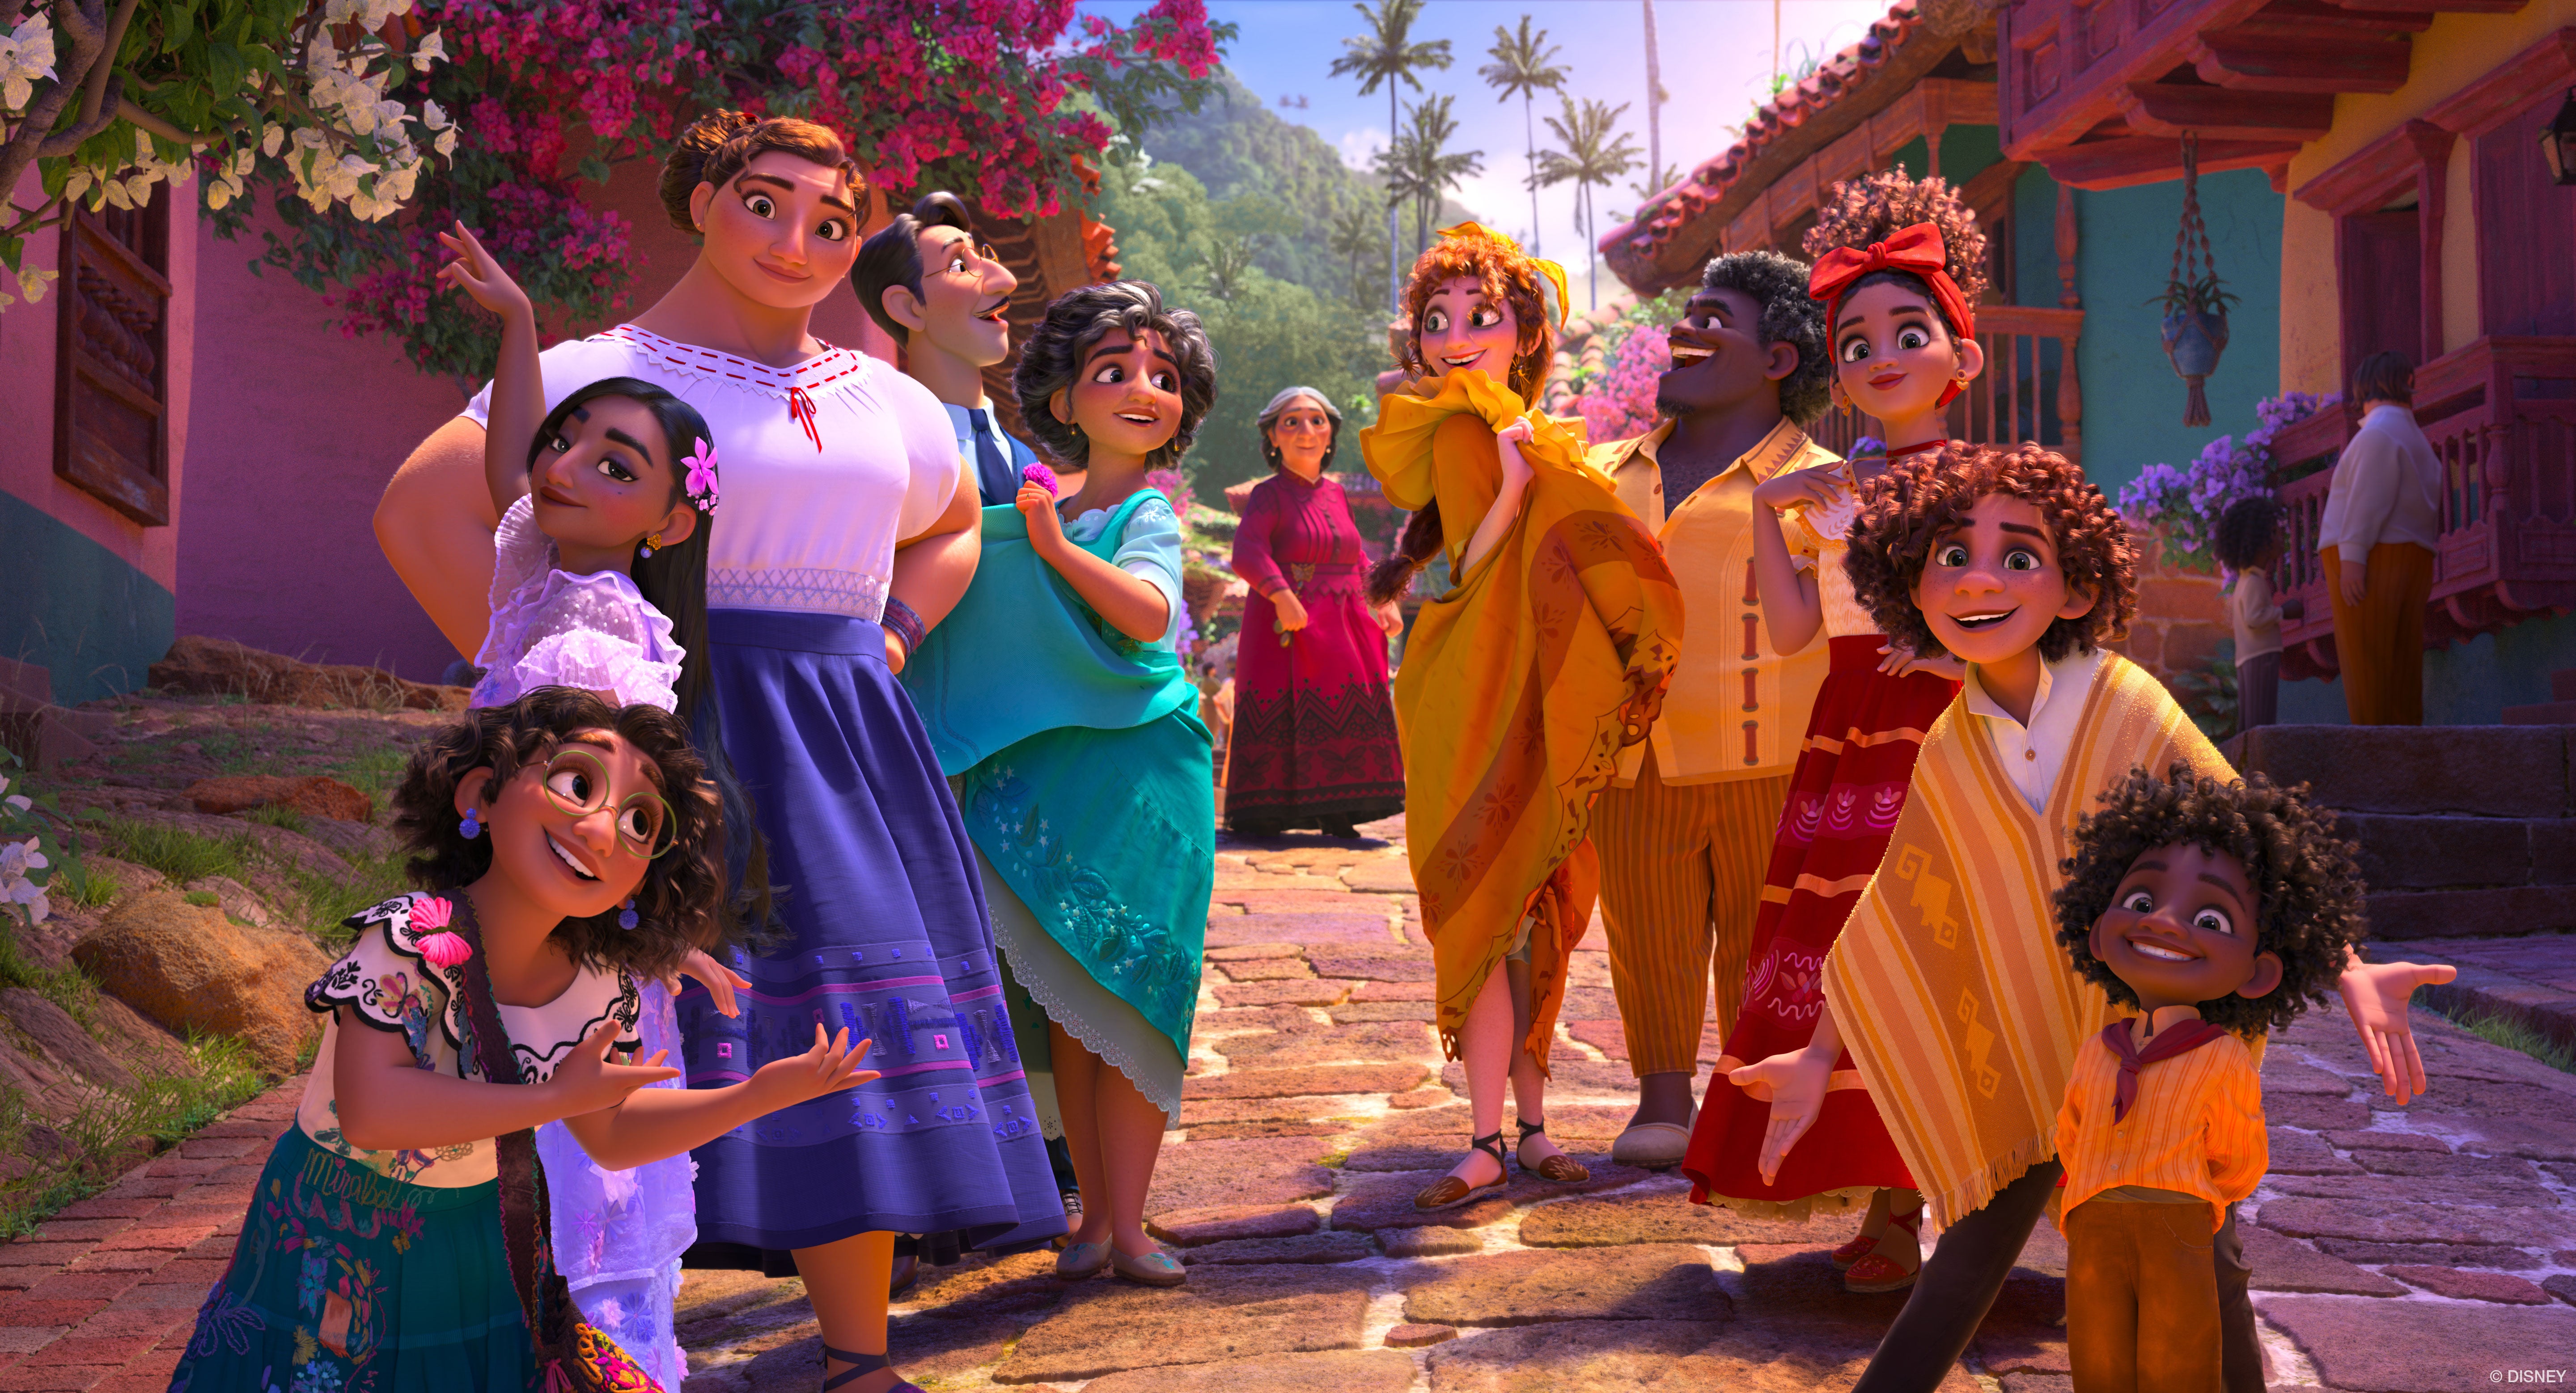 Animated members of Encanto cast shown in bright village scape